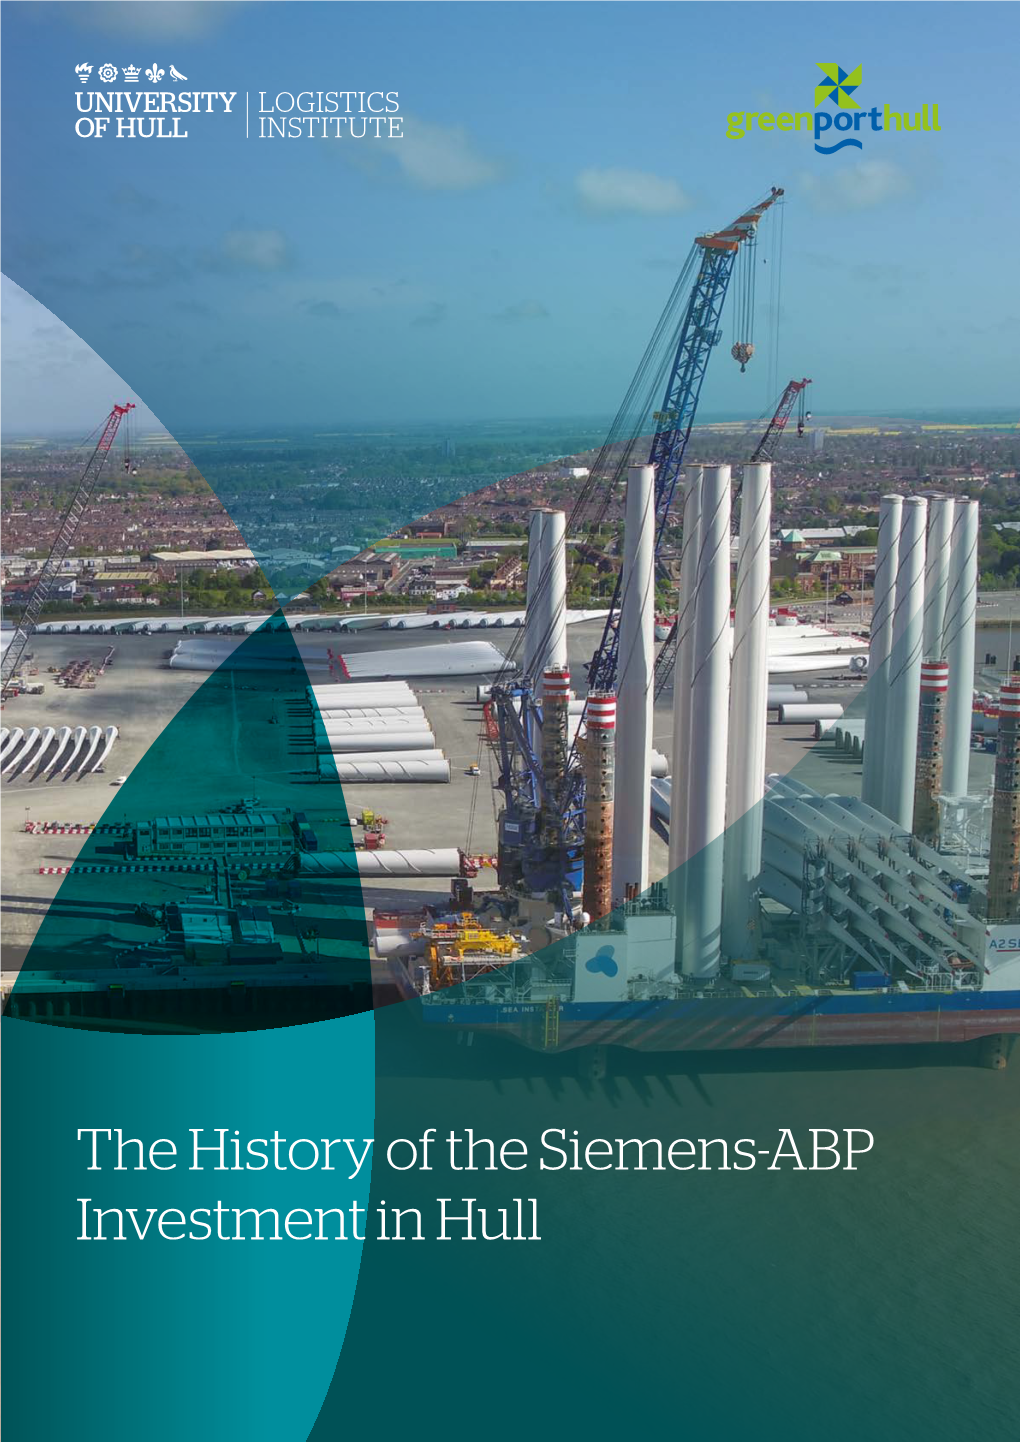 The History of the Siemens-ABP Investment in Hull Contents